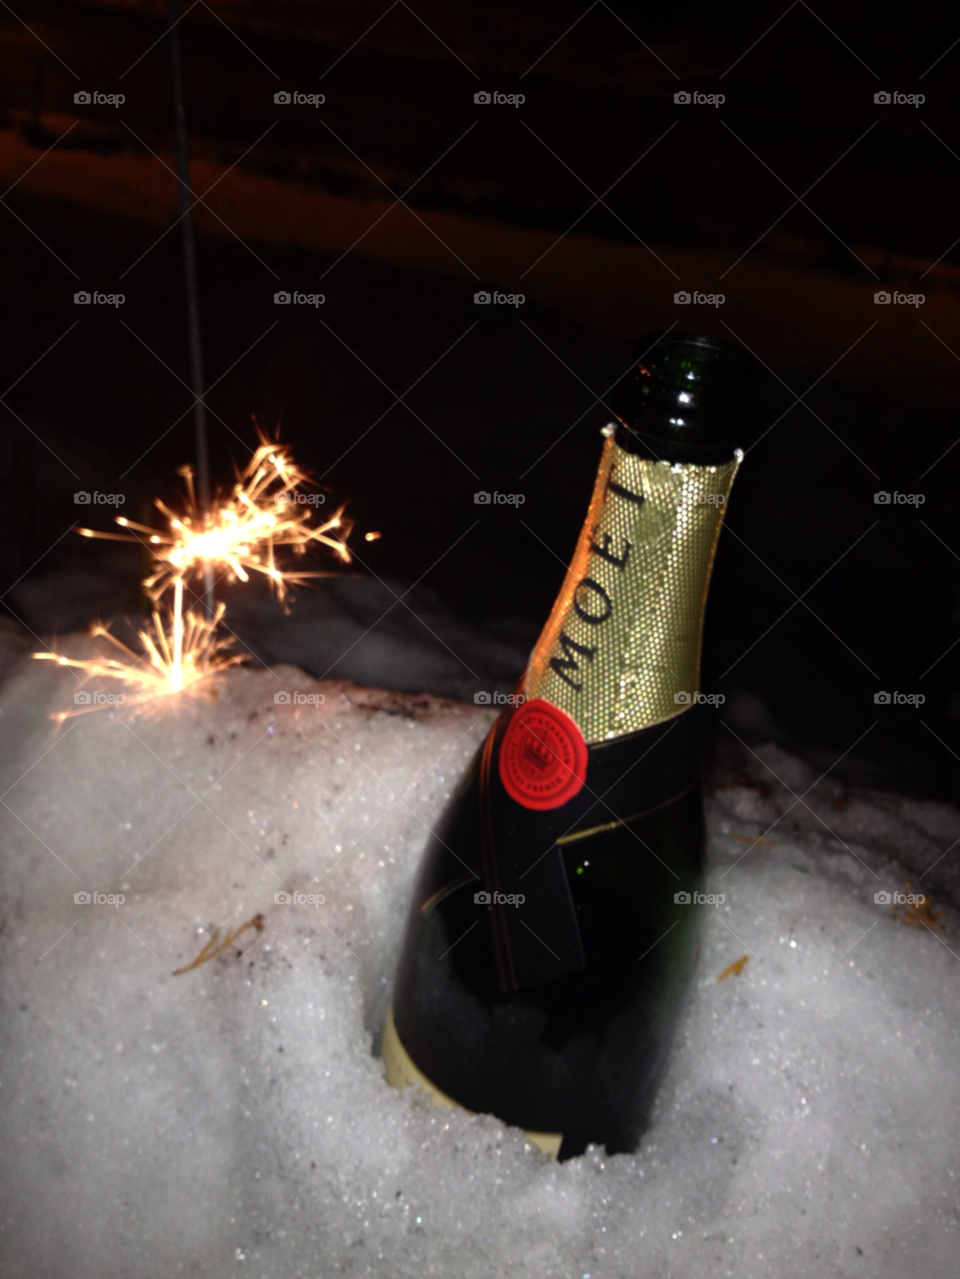 stockholm snow 2012 champagne by kungfreppa